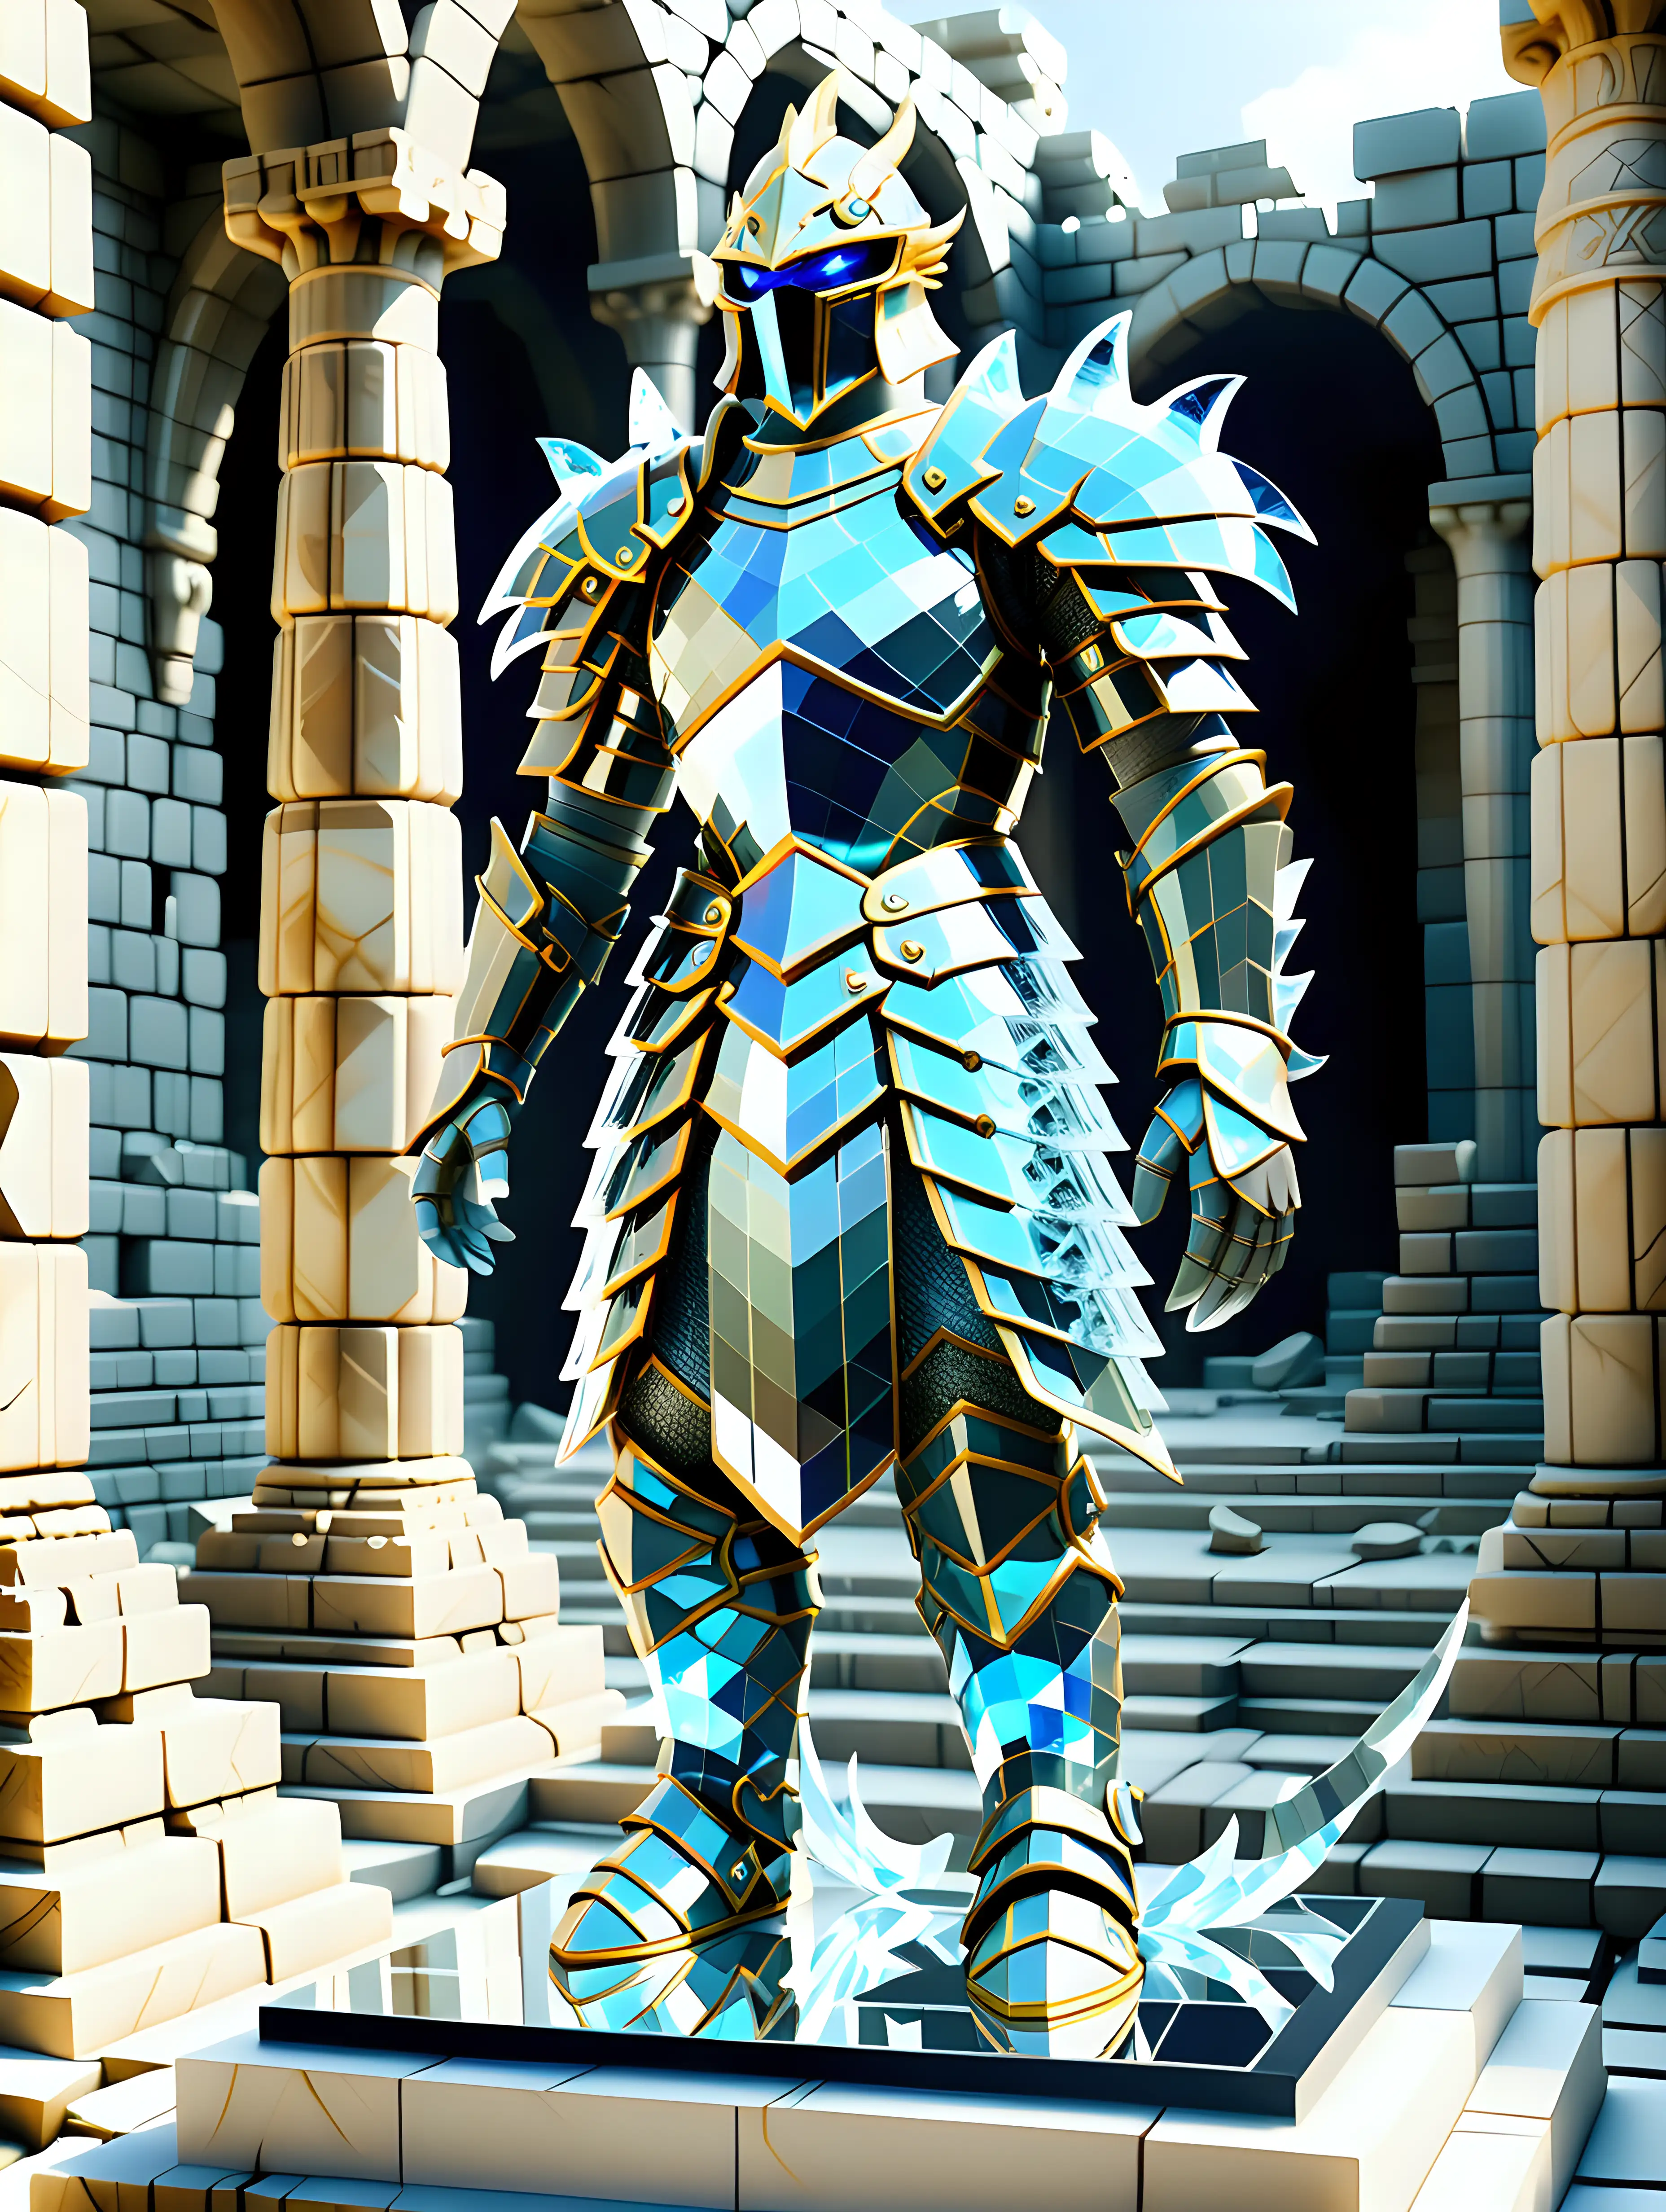 Crystal Draconic Plate Armor Displayed in Ancient Temple Ruins